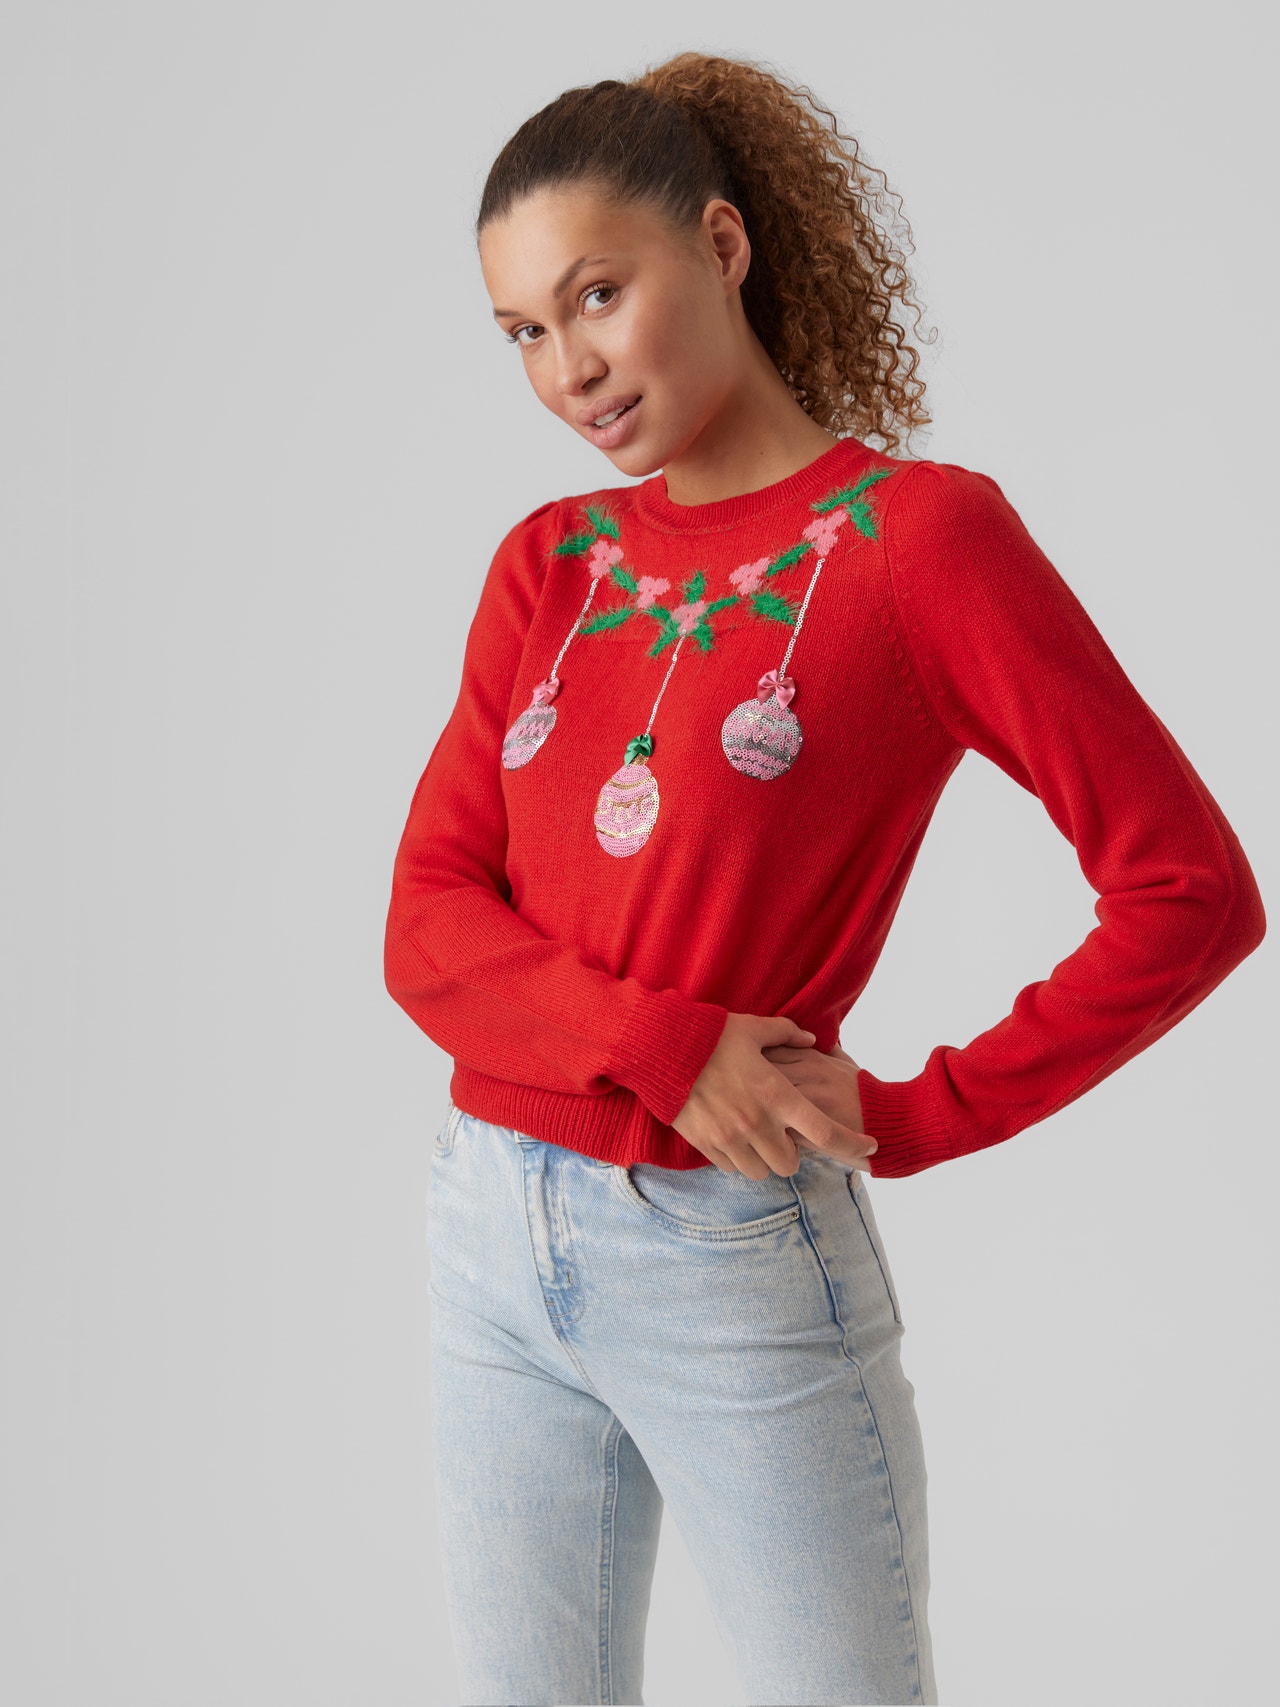 Vero Moda VMCHRISTMAS Pullover -Chinese Red - 10272432